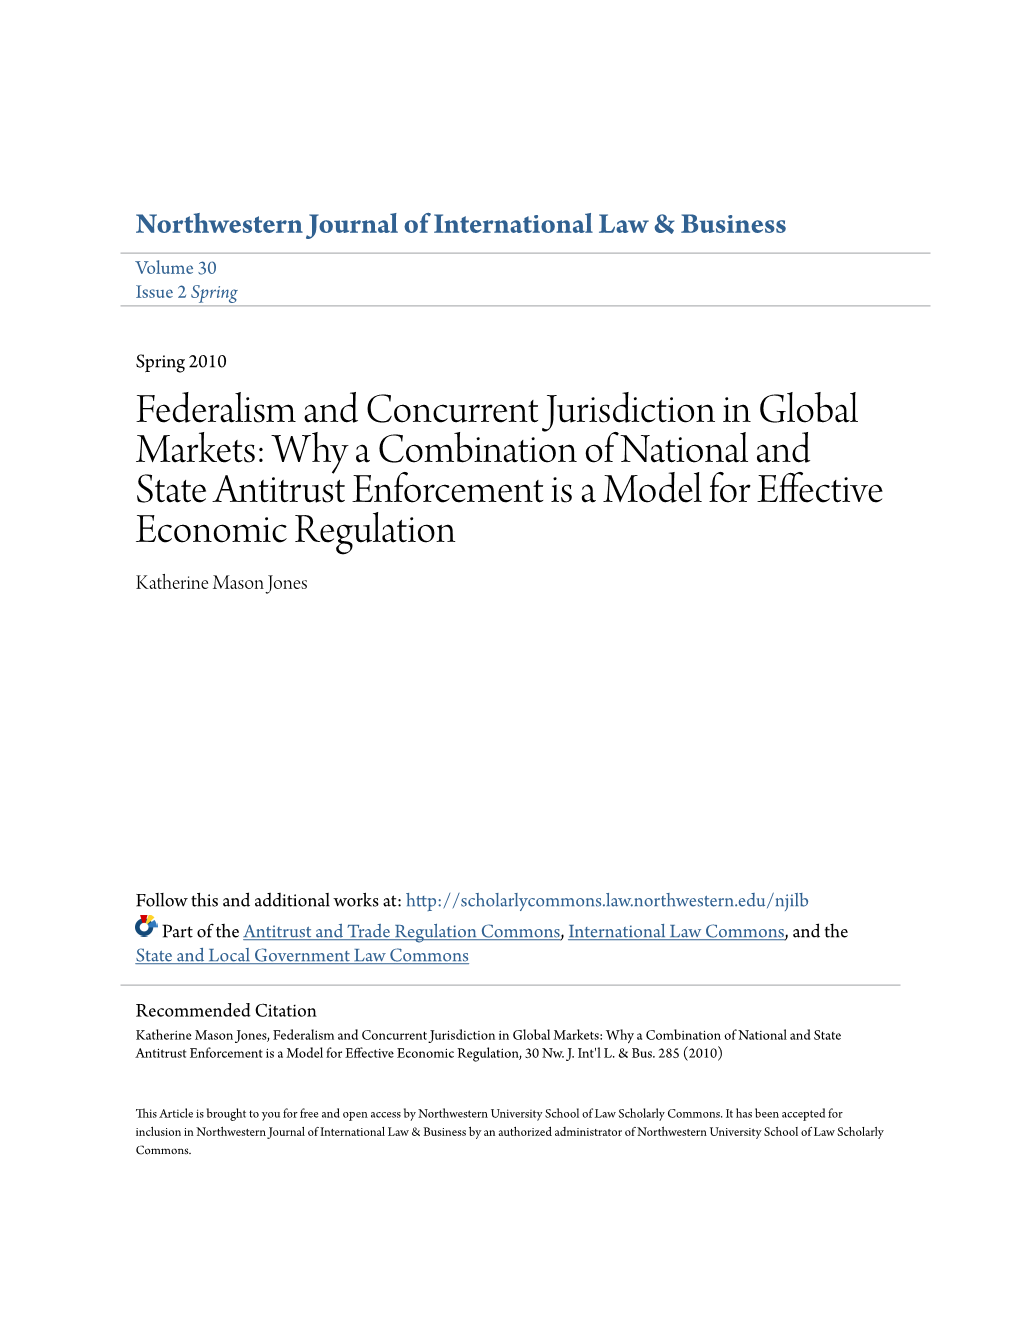 Federalism and Concurrent Jurisdiction in Global Markets: Why